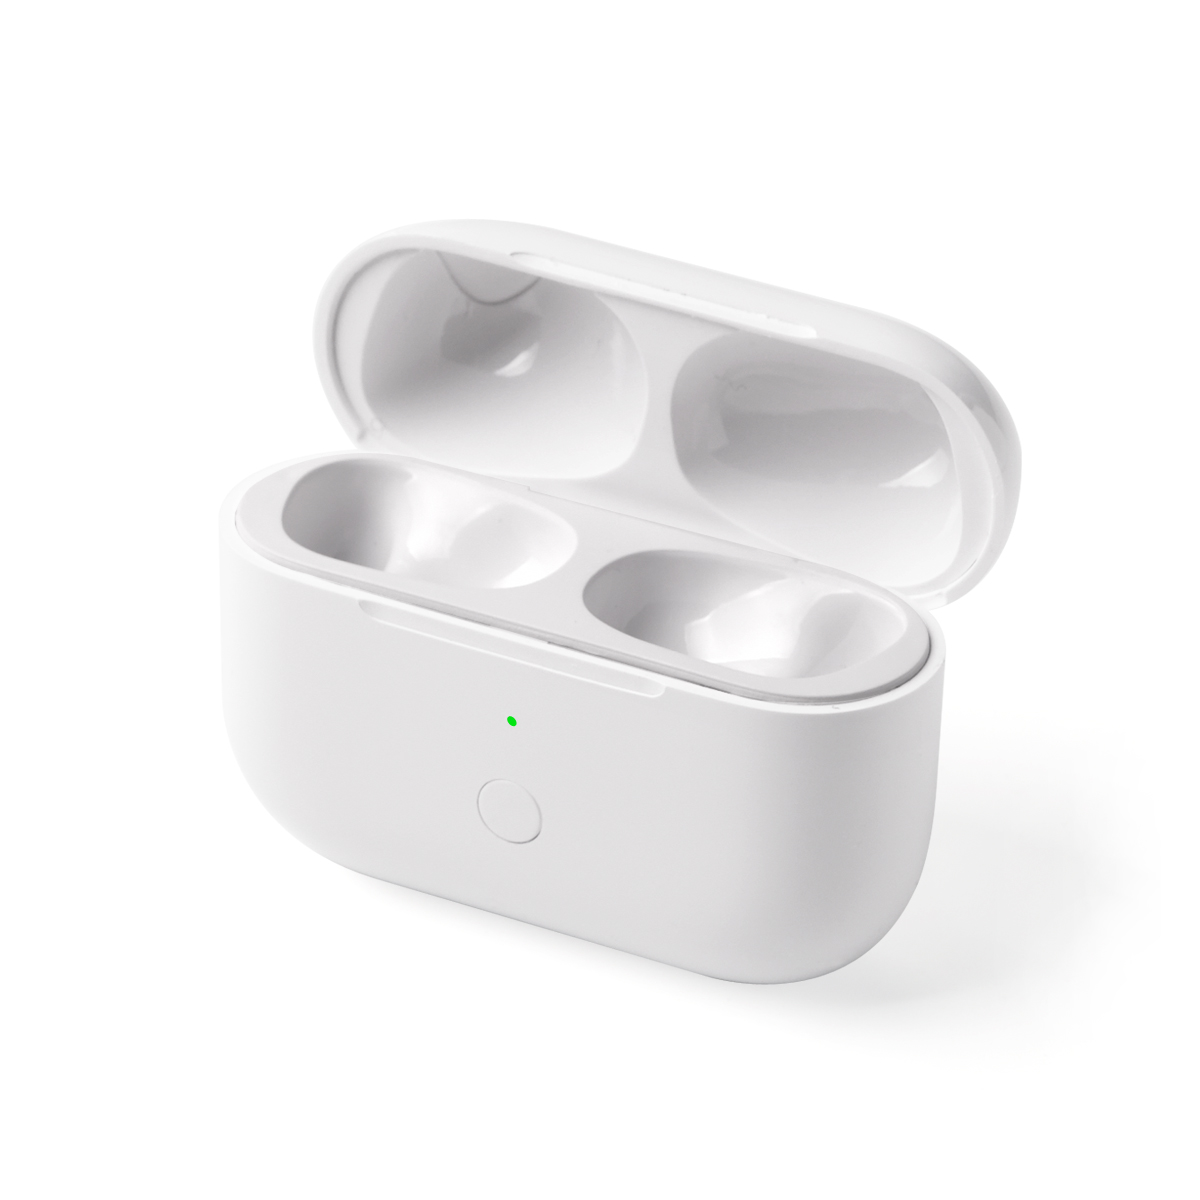 Airpods air pro. AIRPODS Pro 2 кейс. Case Apple AIRPODS Pro 2. Apple AIRPODS Pro Case. AIRPODS Pro 2 футляр.